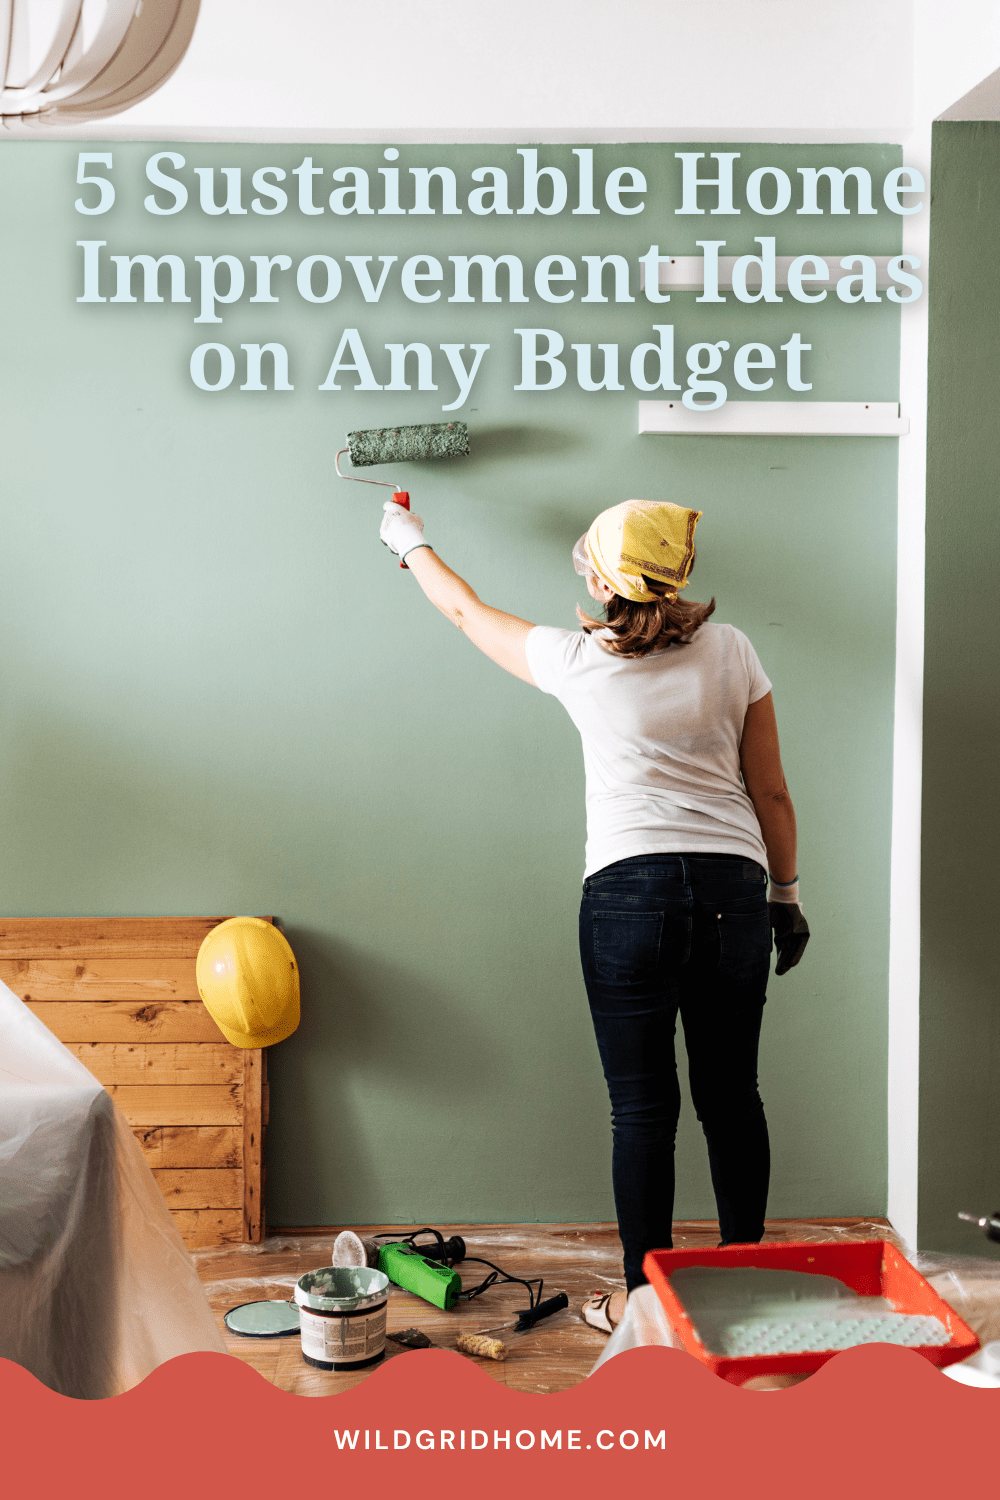 5 Sustainable Home Improvement Ideas on Any Budget  - WildgridHome.com